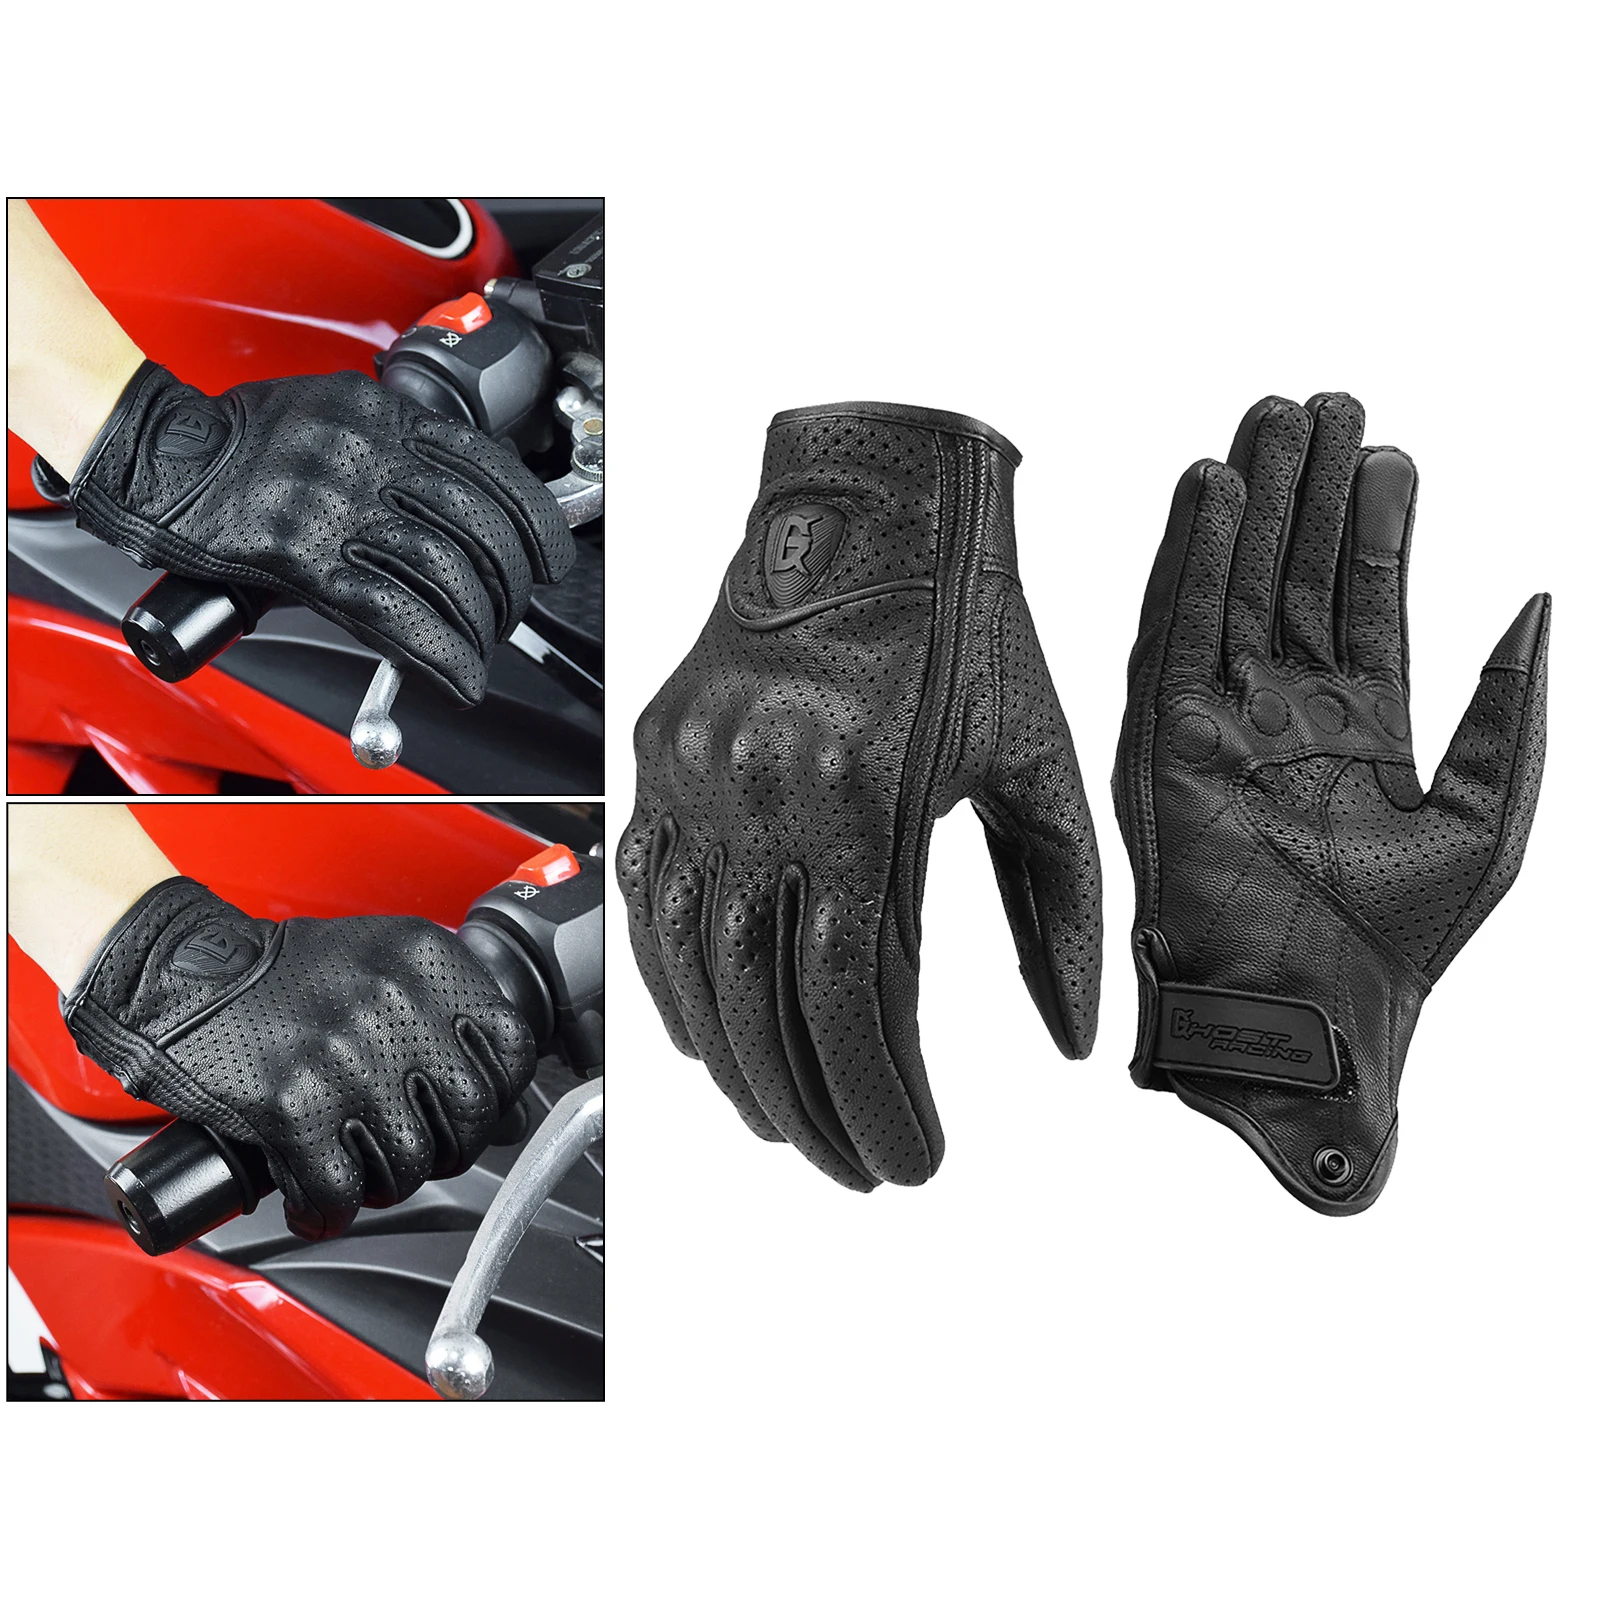 Premium Breathable Mesh Leather Motorcycle Gloves Full-Finger Racing Touch Screen for Driving Skiing Patrol Shooting Black